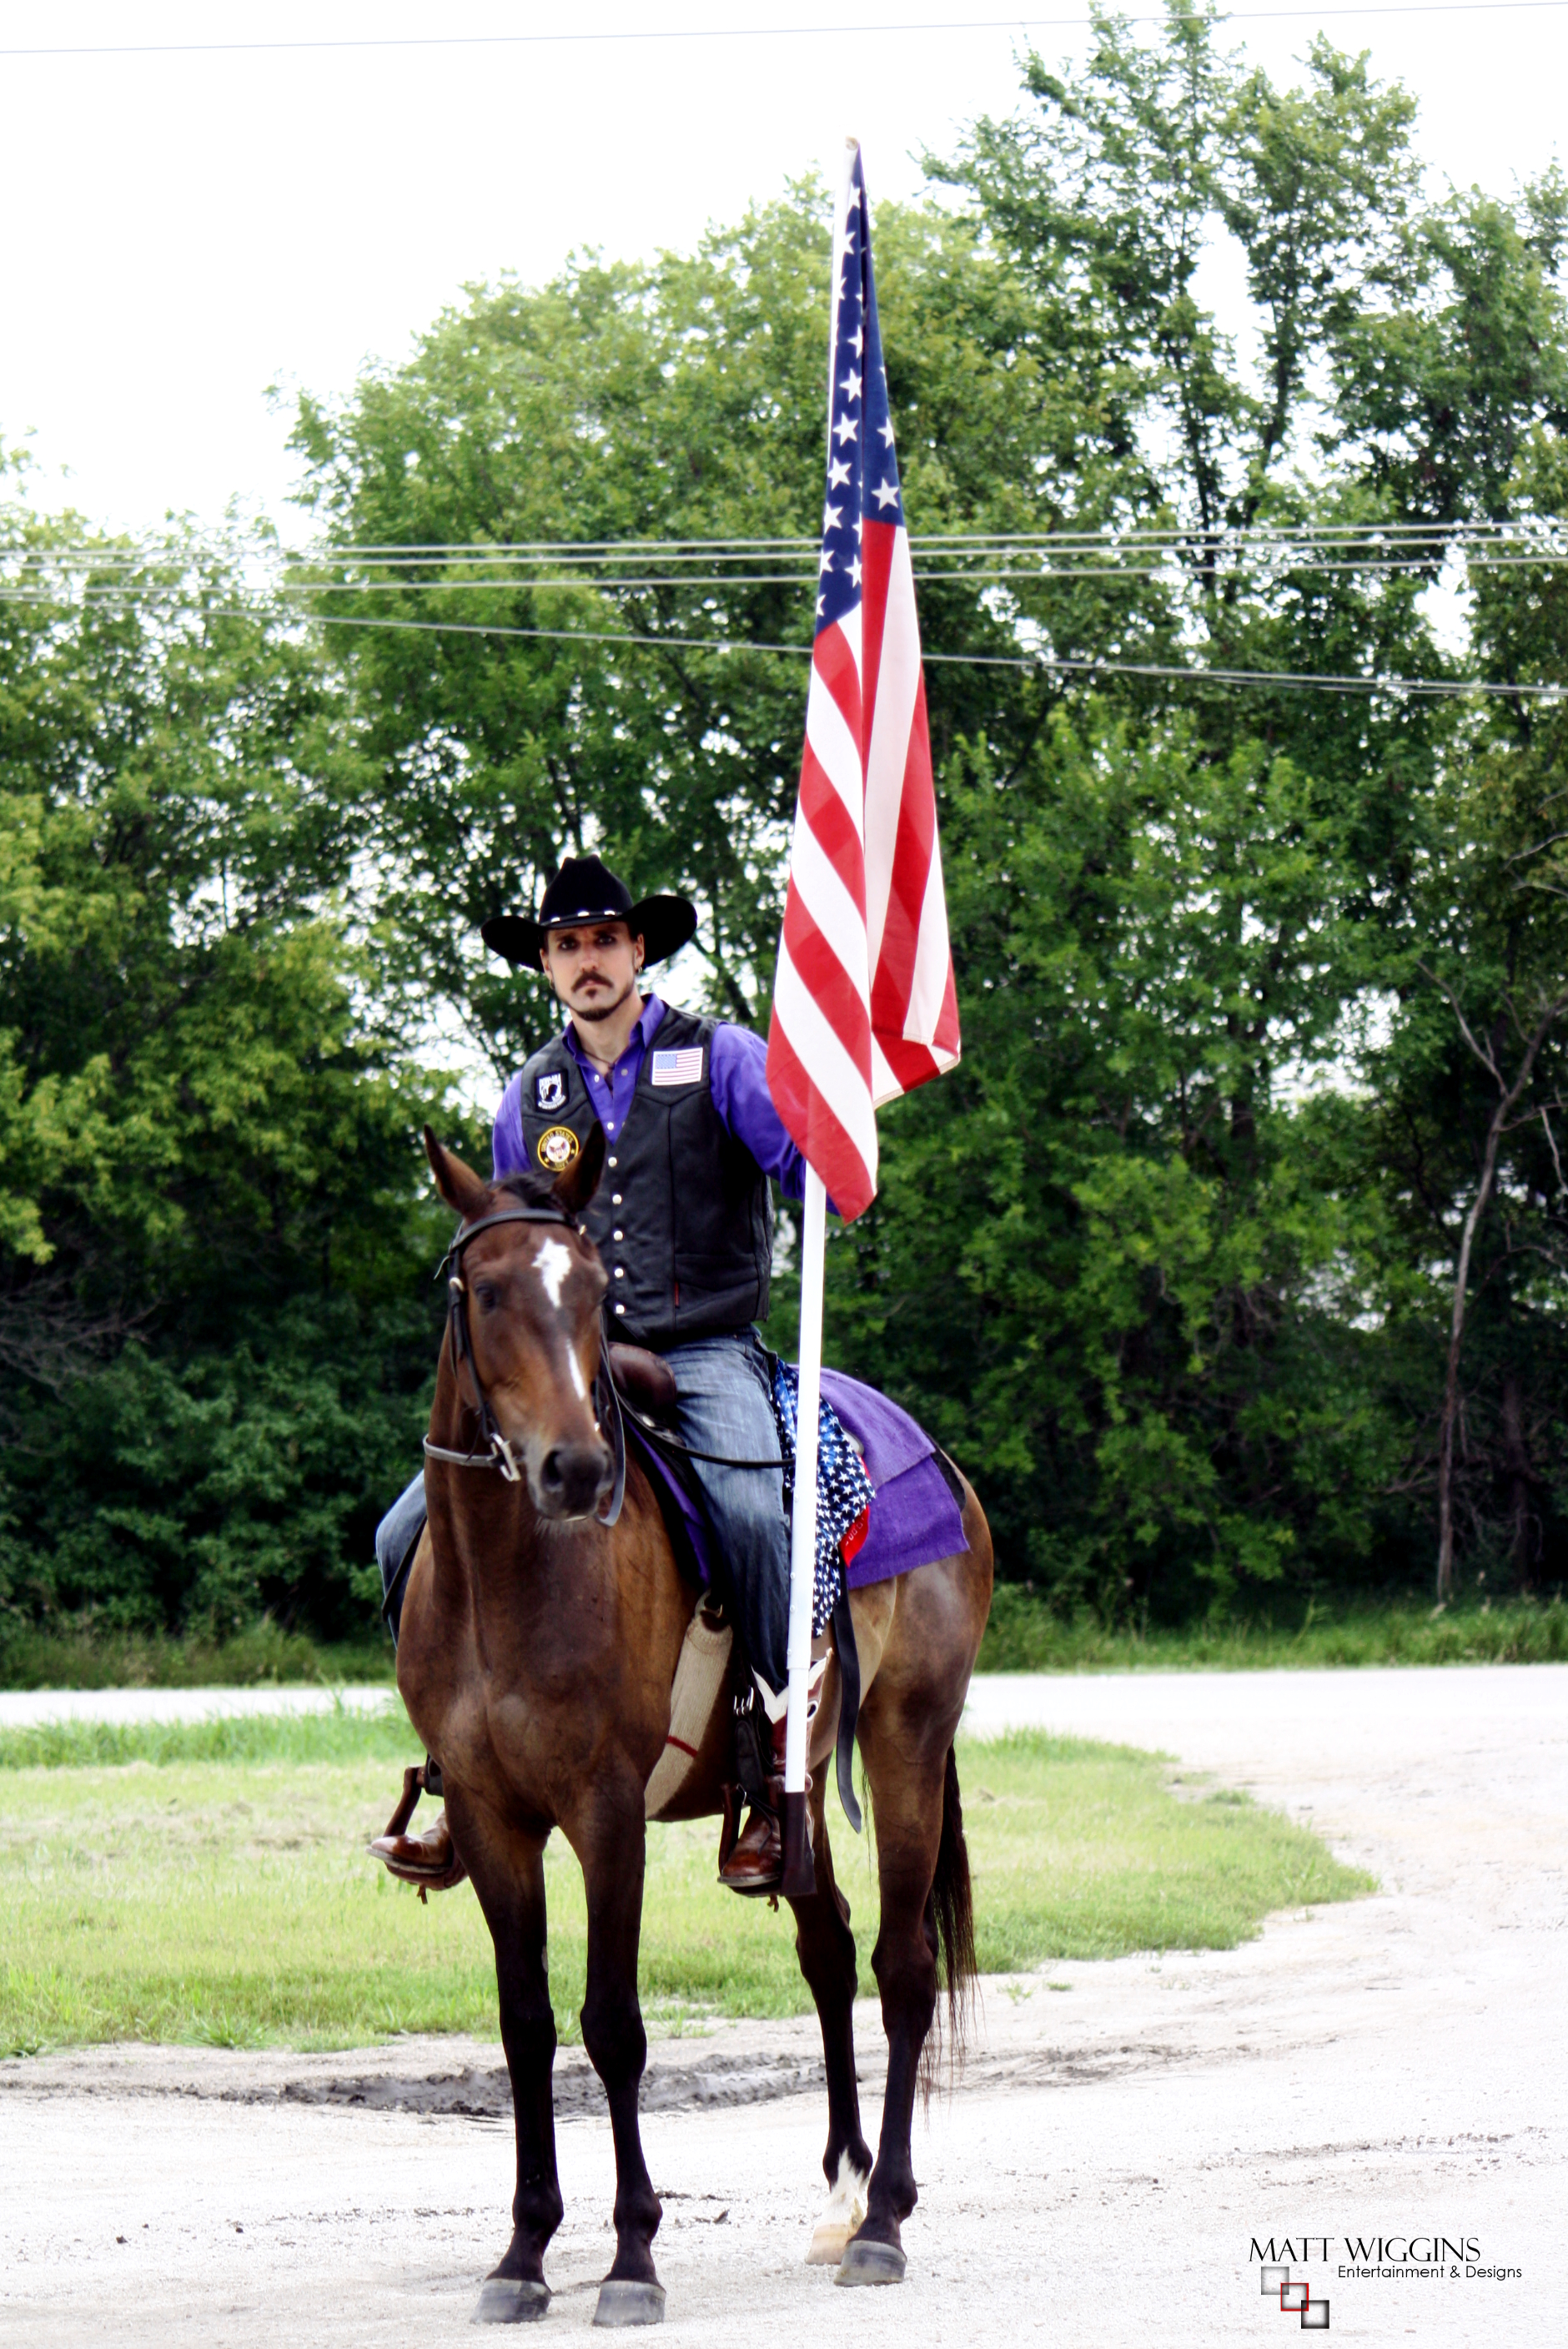 MATT WIGGINS prepares for parade on his thoroughbred SALVATORE appearance on behalf of fellow veterans in September 2014.